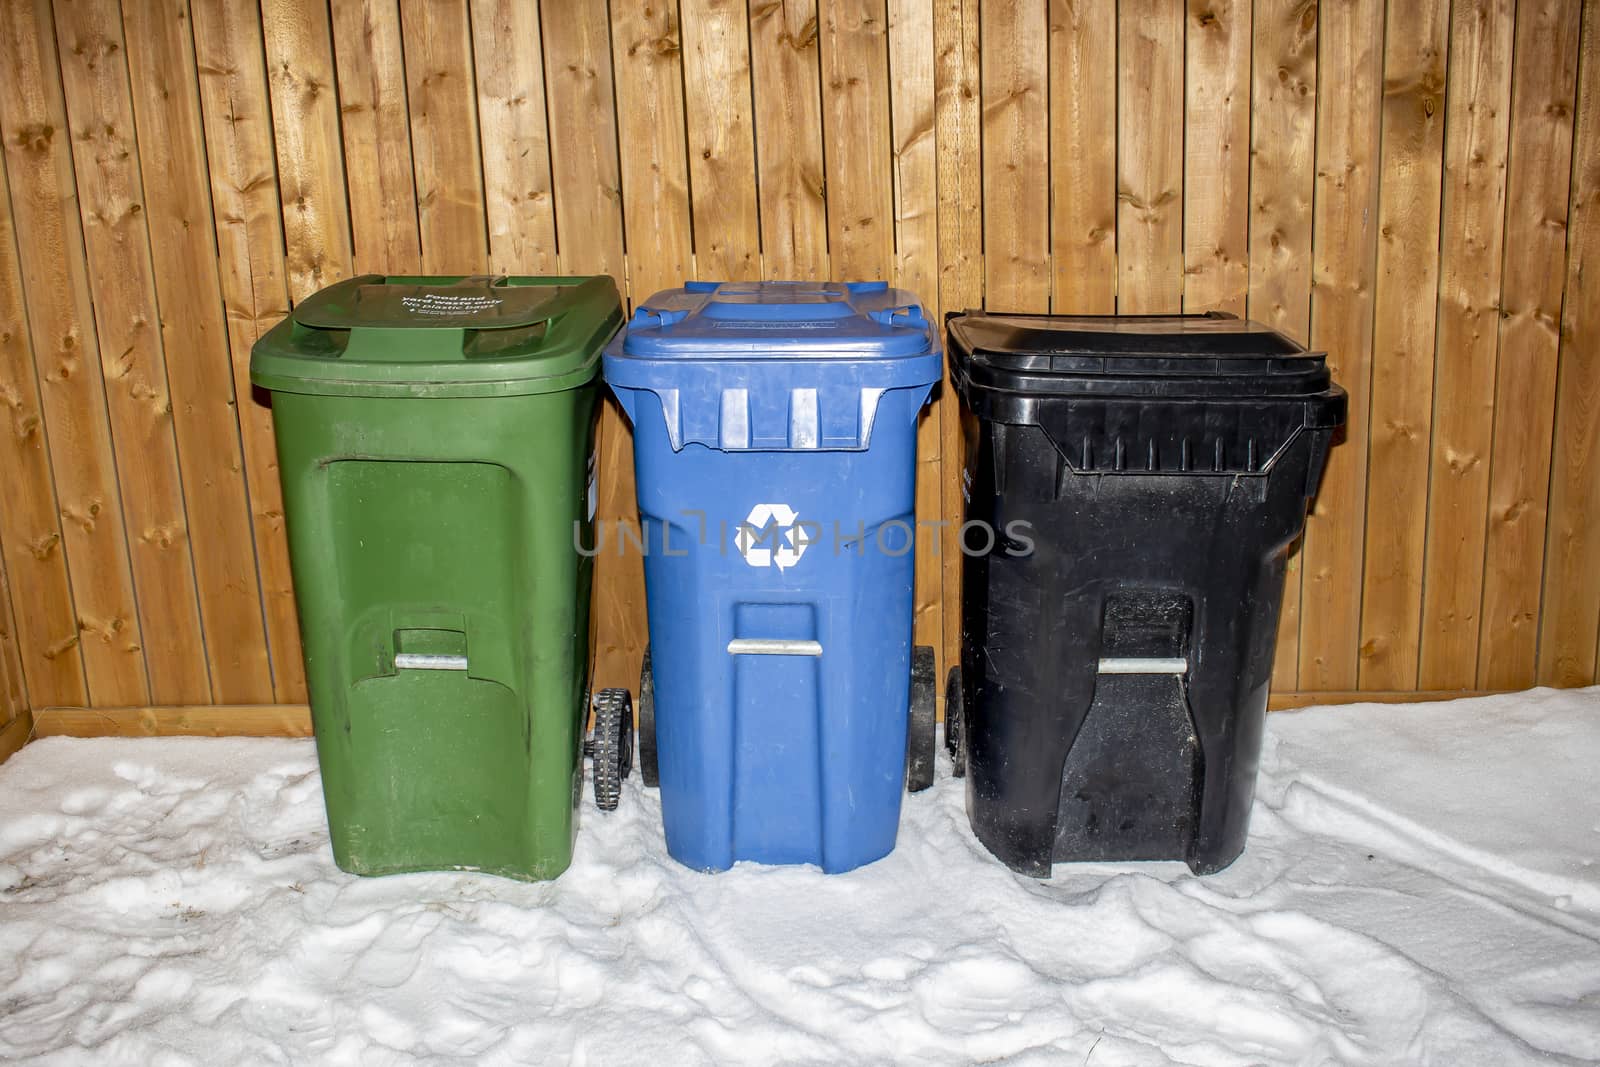 A Green cart for composting, Blue cart for recycling and a black cart for garbage sitting on a back alley during winter by oasisamuel